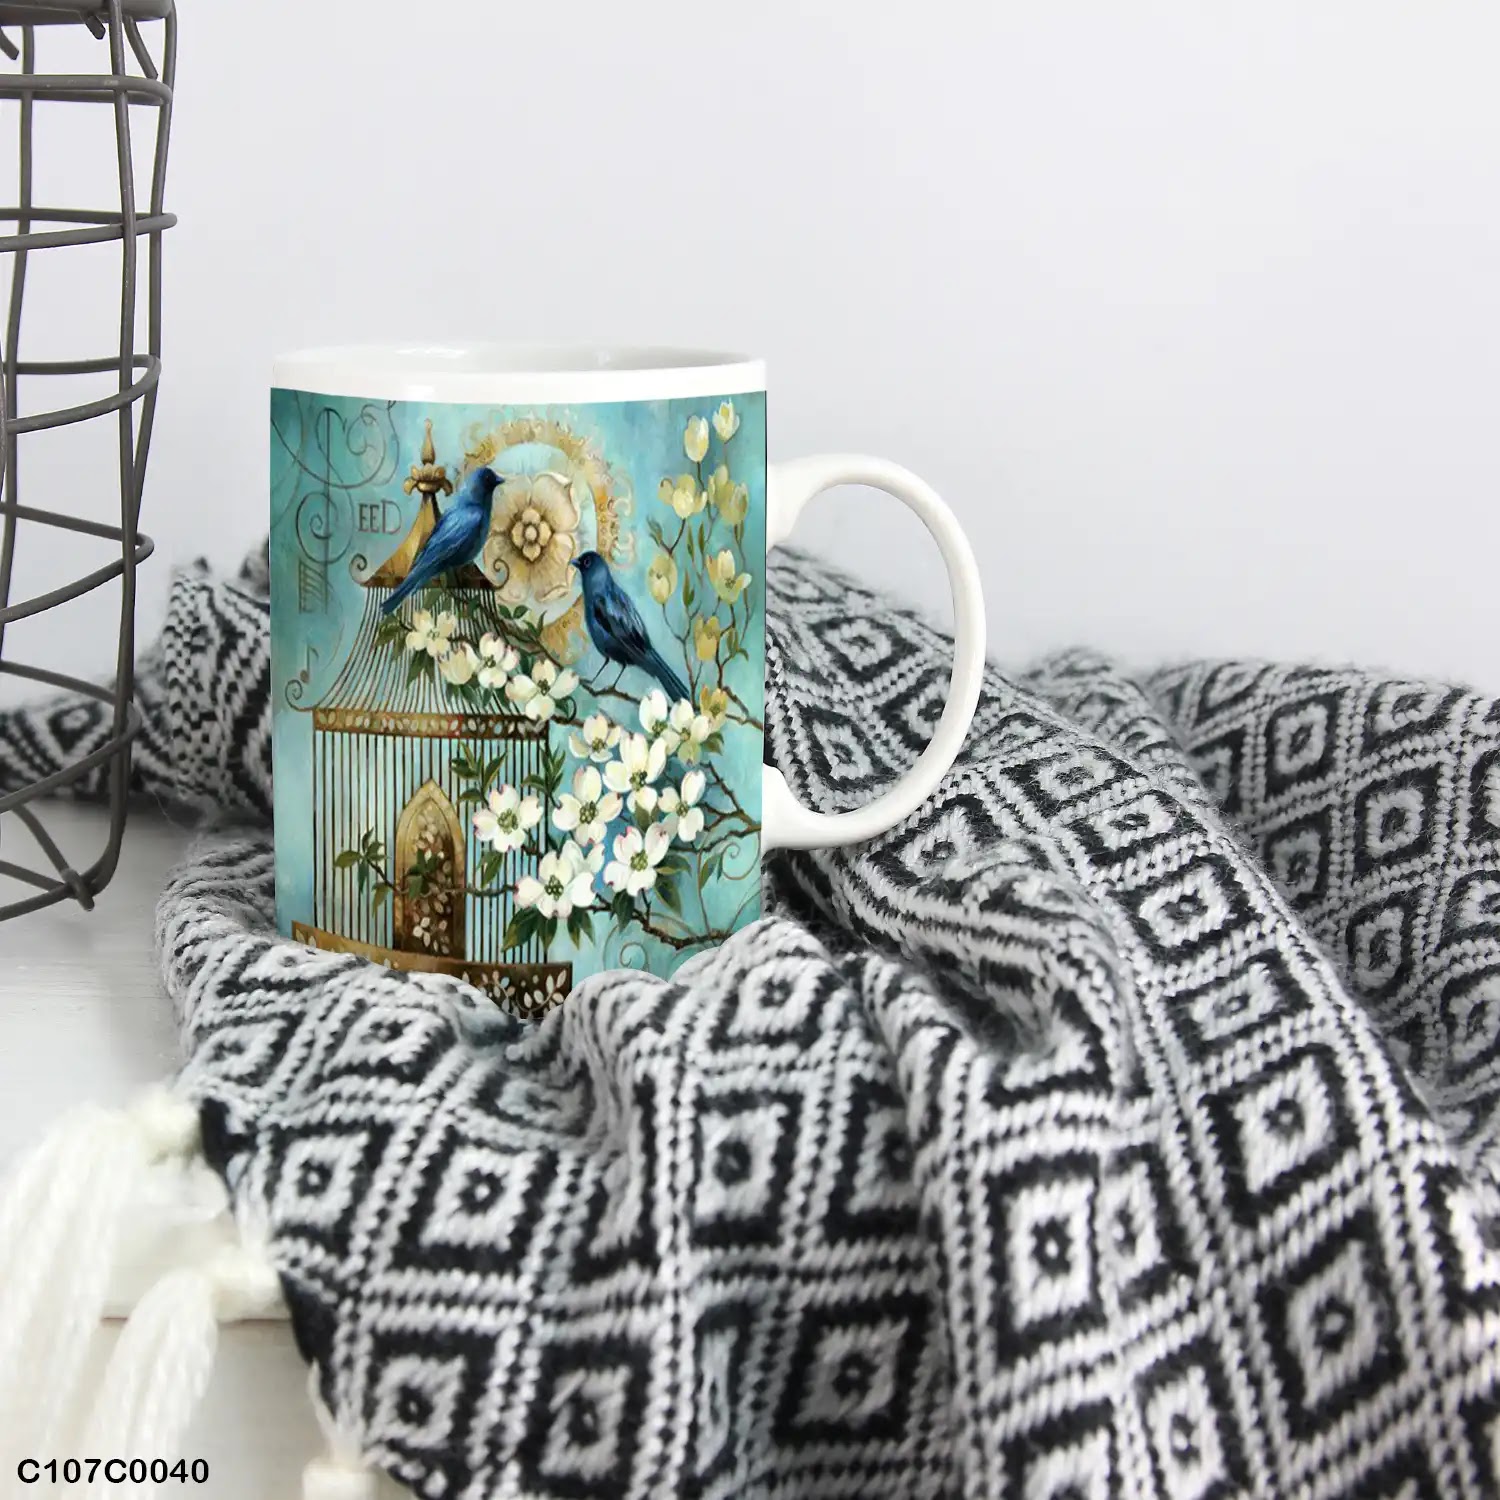 A Turquoise mug (cup) printed with an image of flowers and bird cage